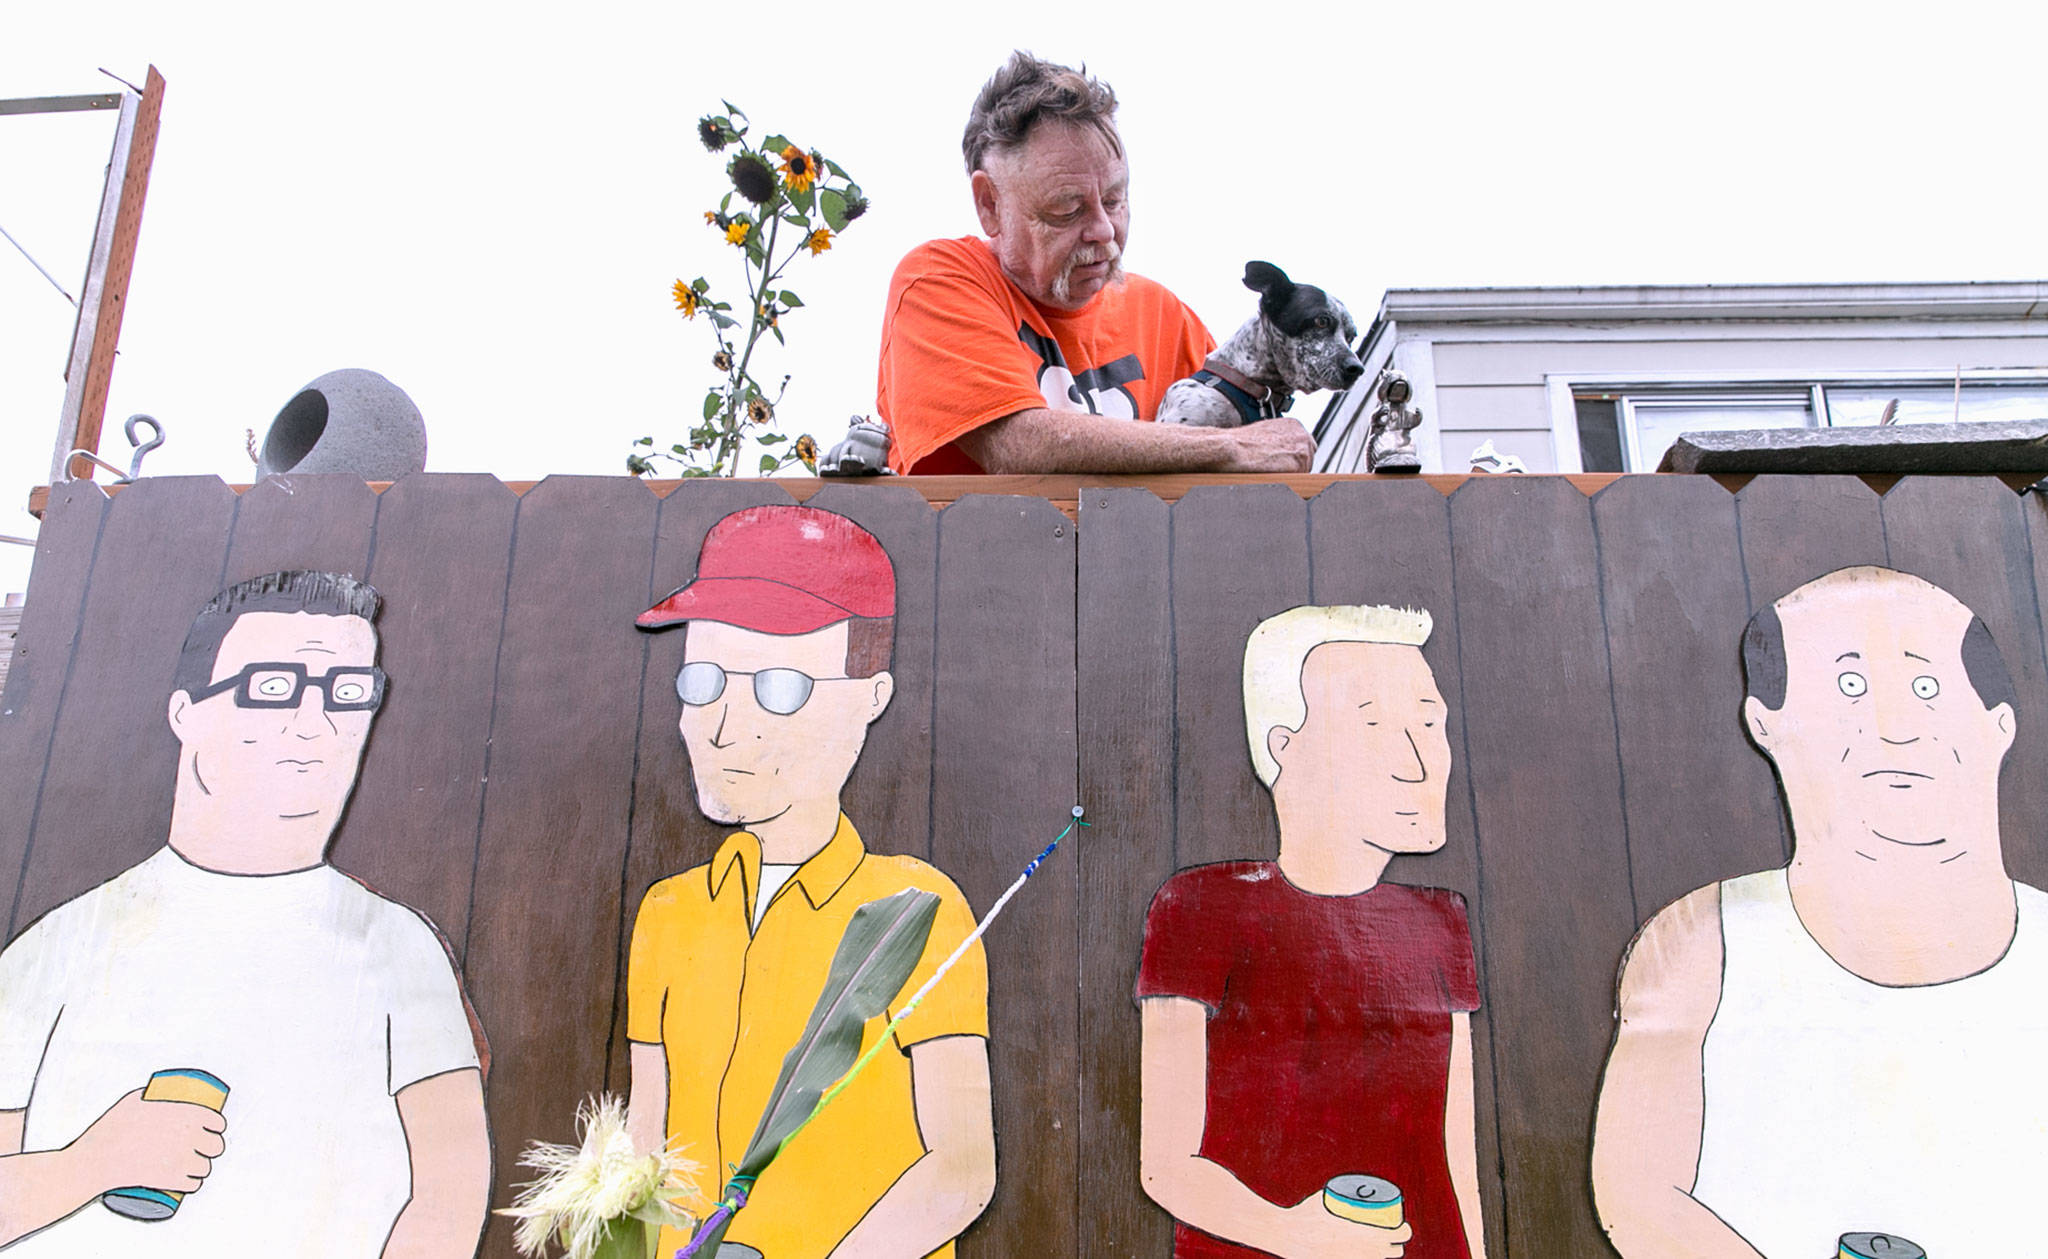 Why are there 'King of the Hill' figures in the front yard?